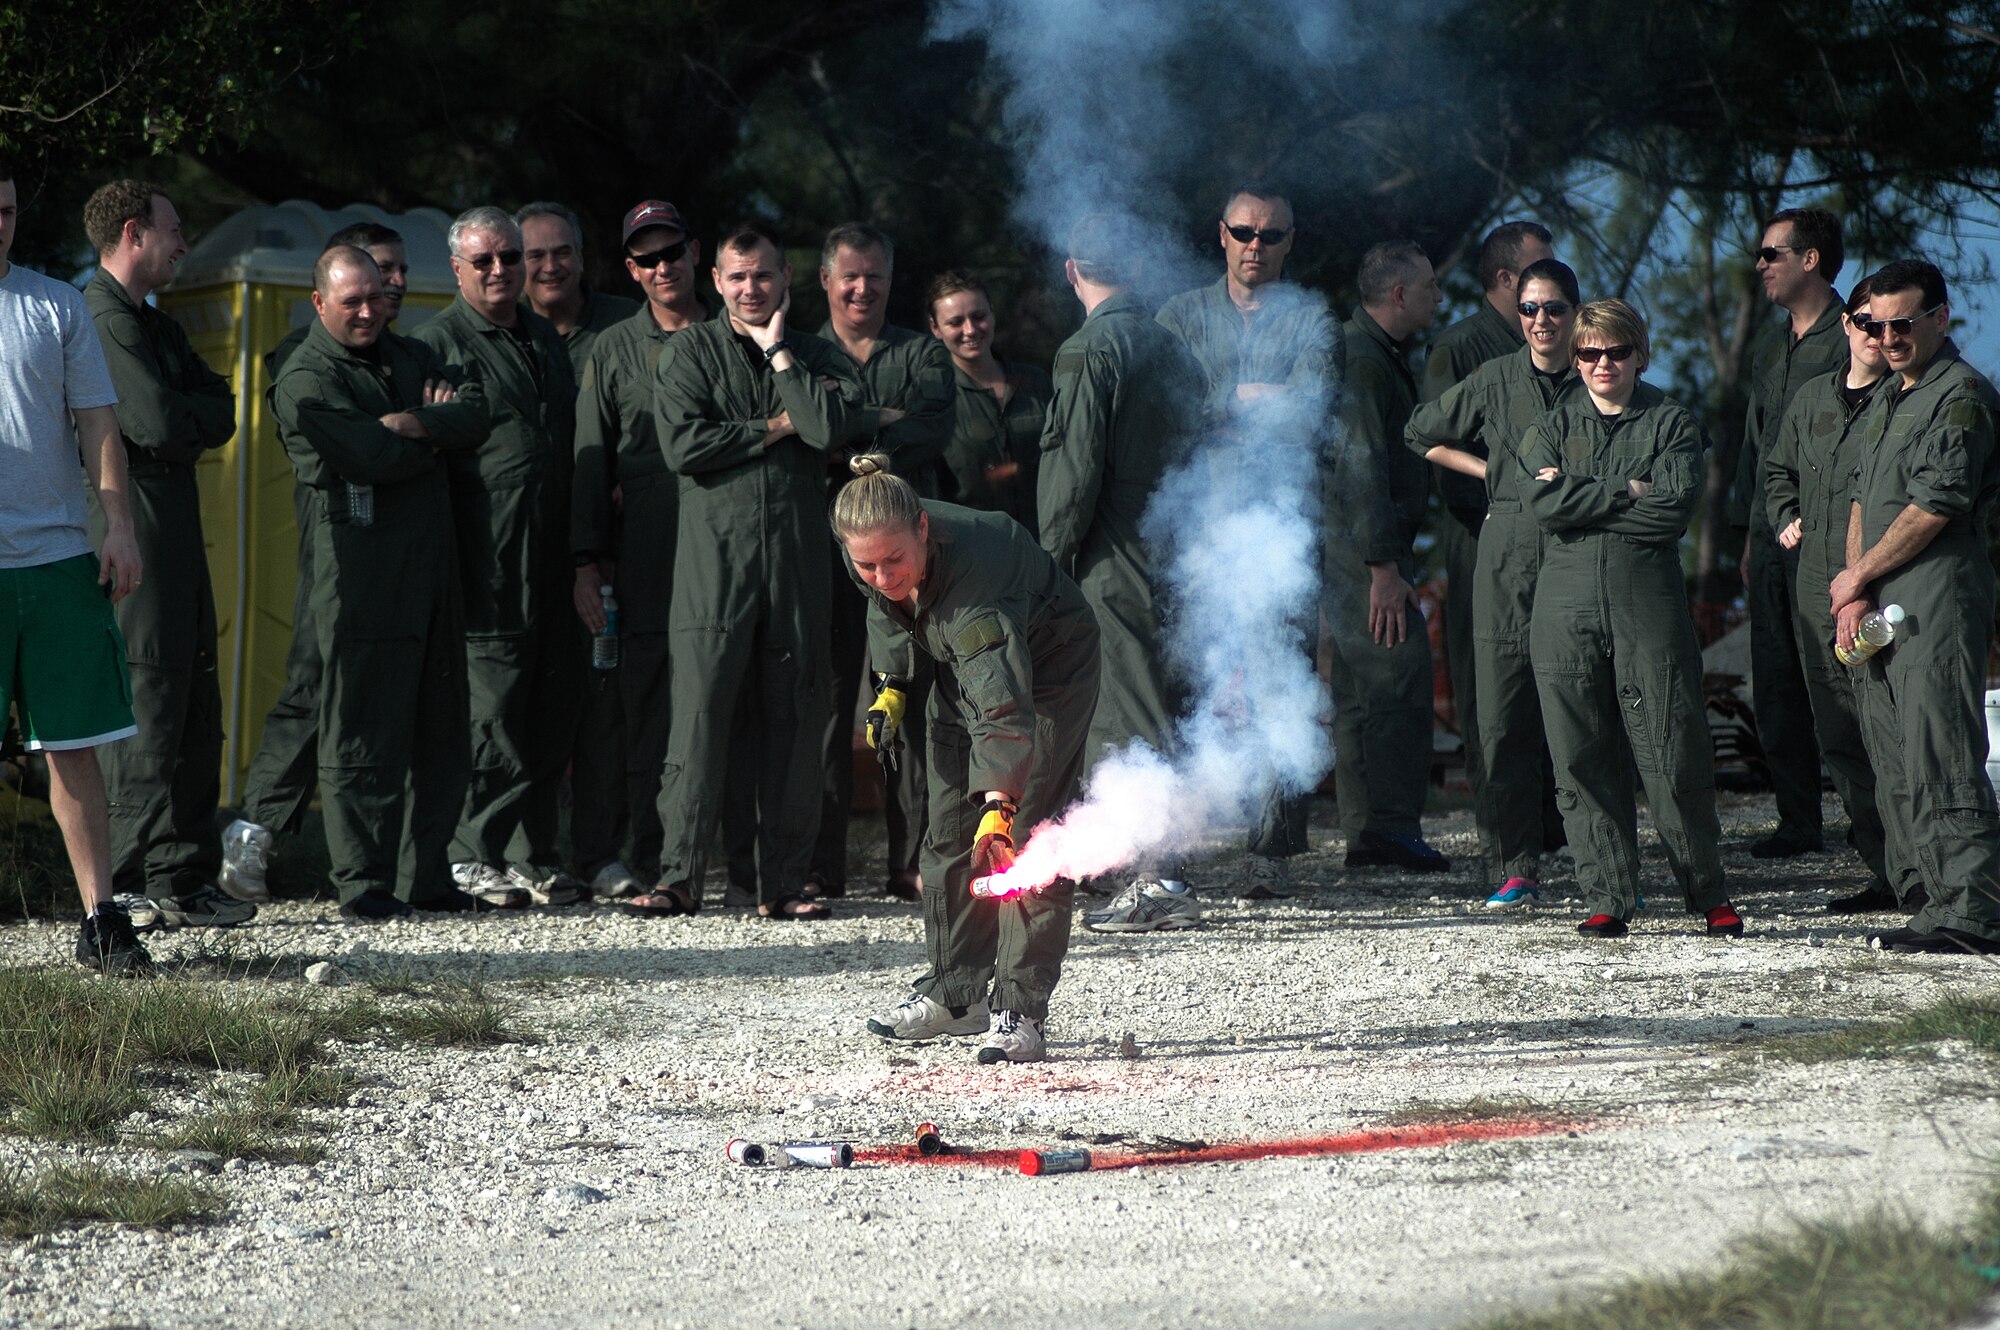 Aircrew surivival training teaches flyers how to survive in hostile and unforgiving environments. Tech. Sgt. Ava Swedock, a 337th Airlift Squadron loadmaster, practices lighting a rescue flare during the exercise at a beach in Key West, Fla. 